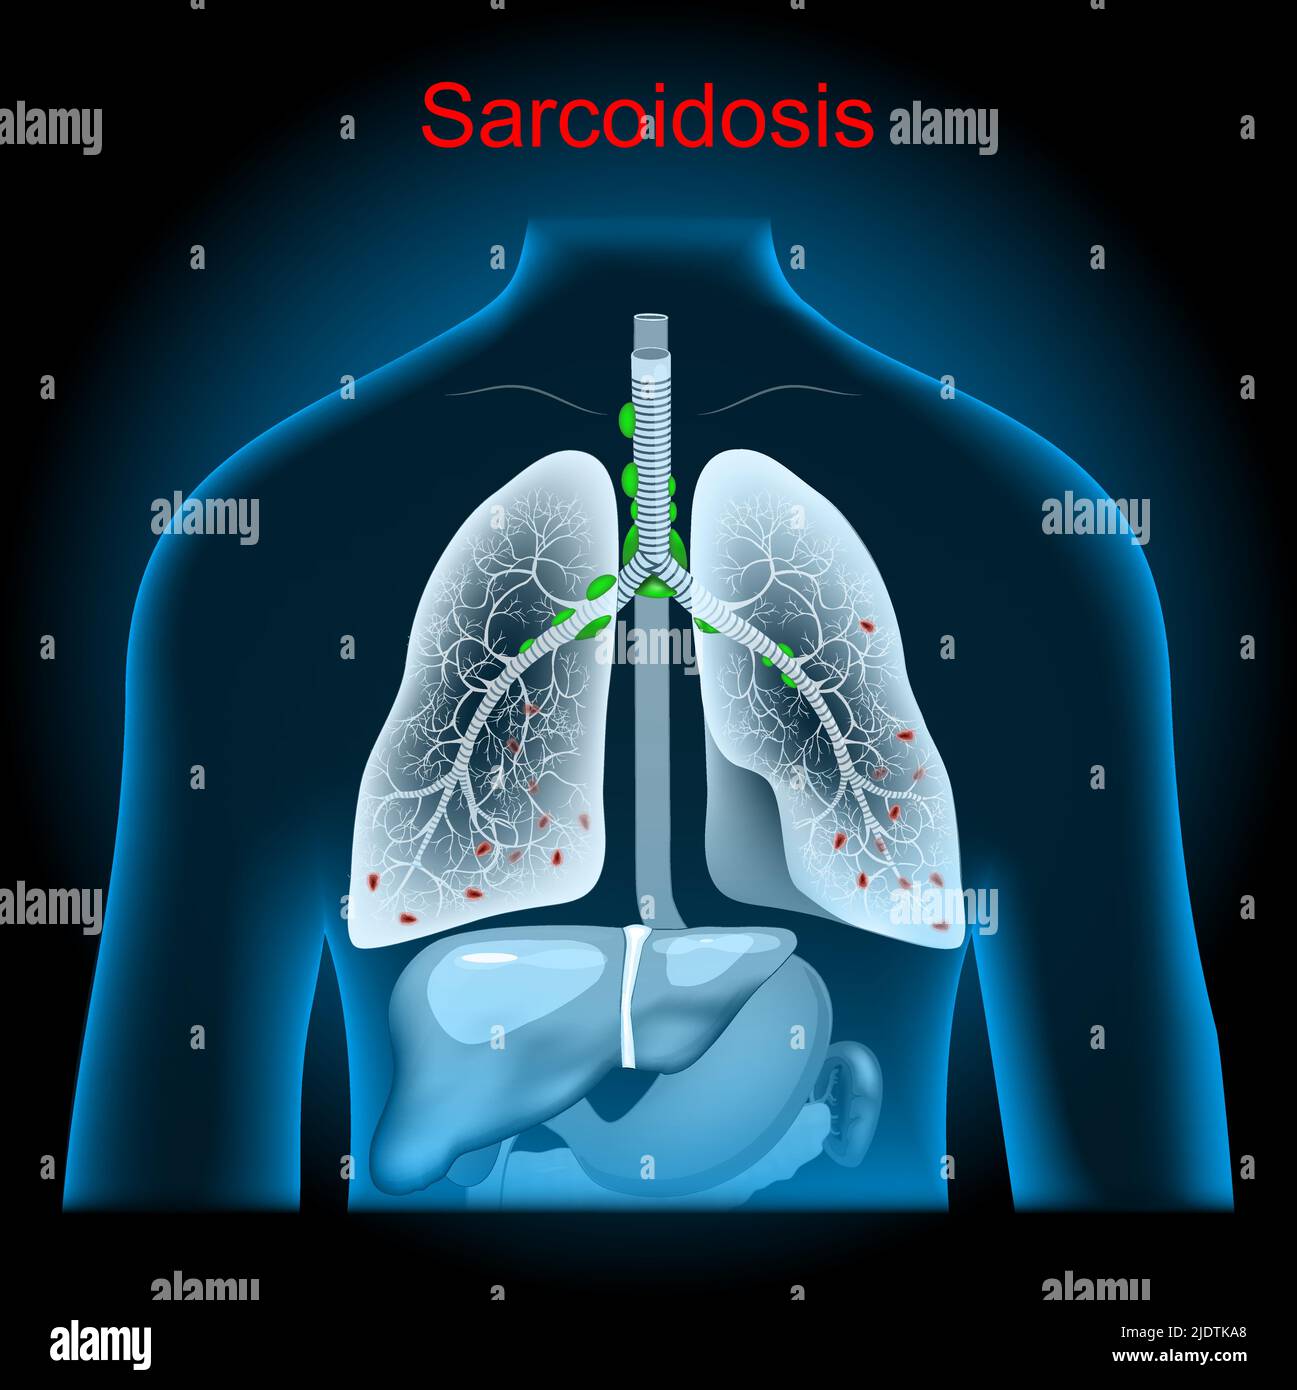 Sarcoidosis. Enlarged lymph nodes. Lungs with granulomas, stomach and liver into x-ray blue realistic torso. Human silhouette on dark background Stock Vector